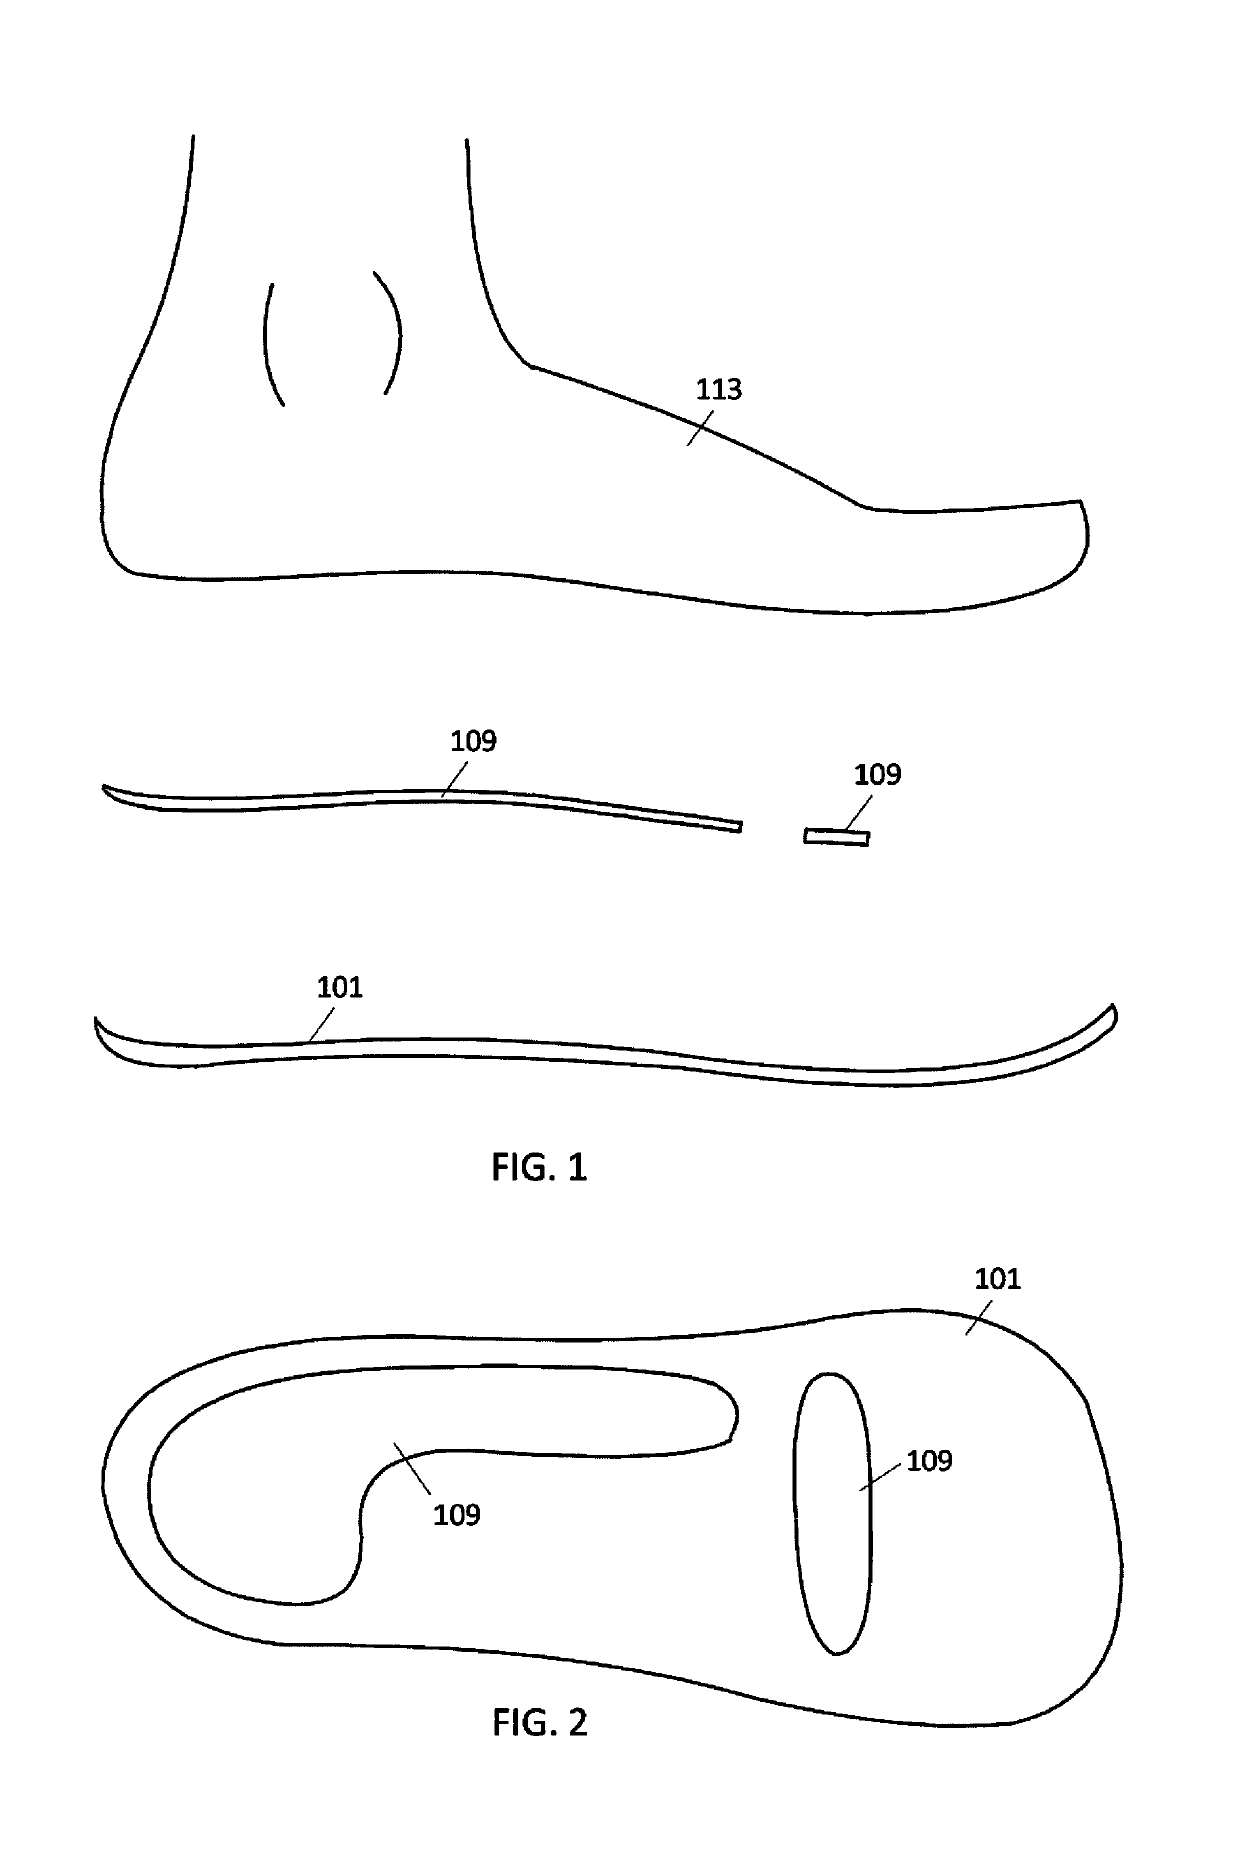 Adhesive footwear and devices